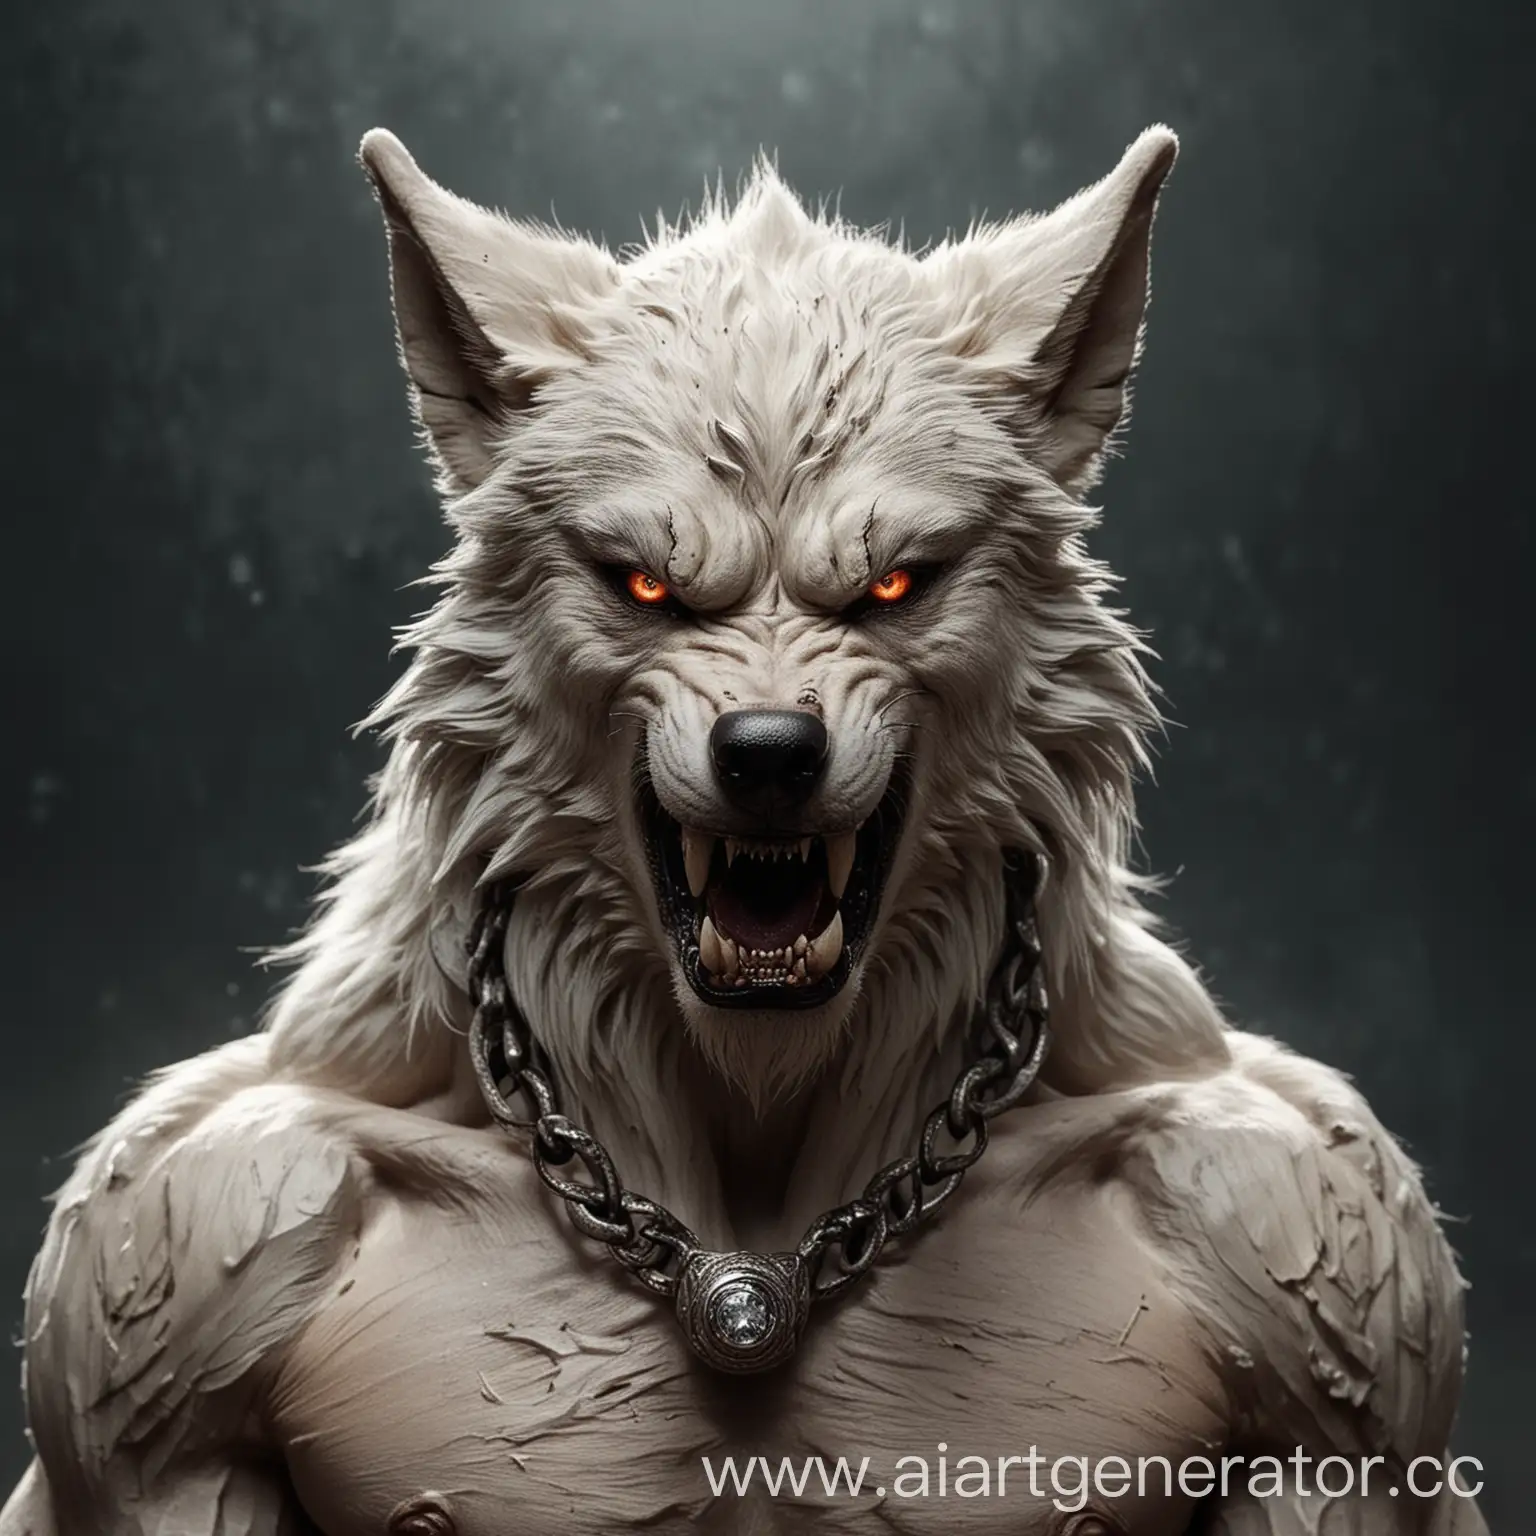 Sinister-Wolf-with-Muscular-Build-and-Pierced-Ear